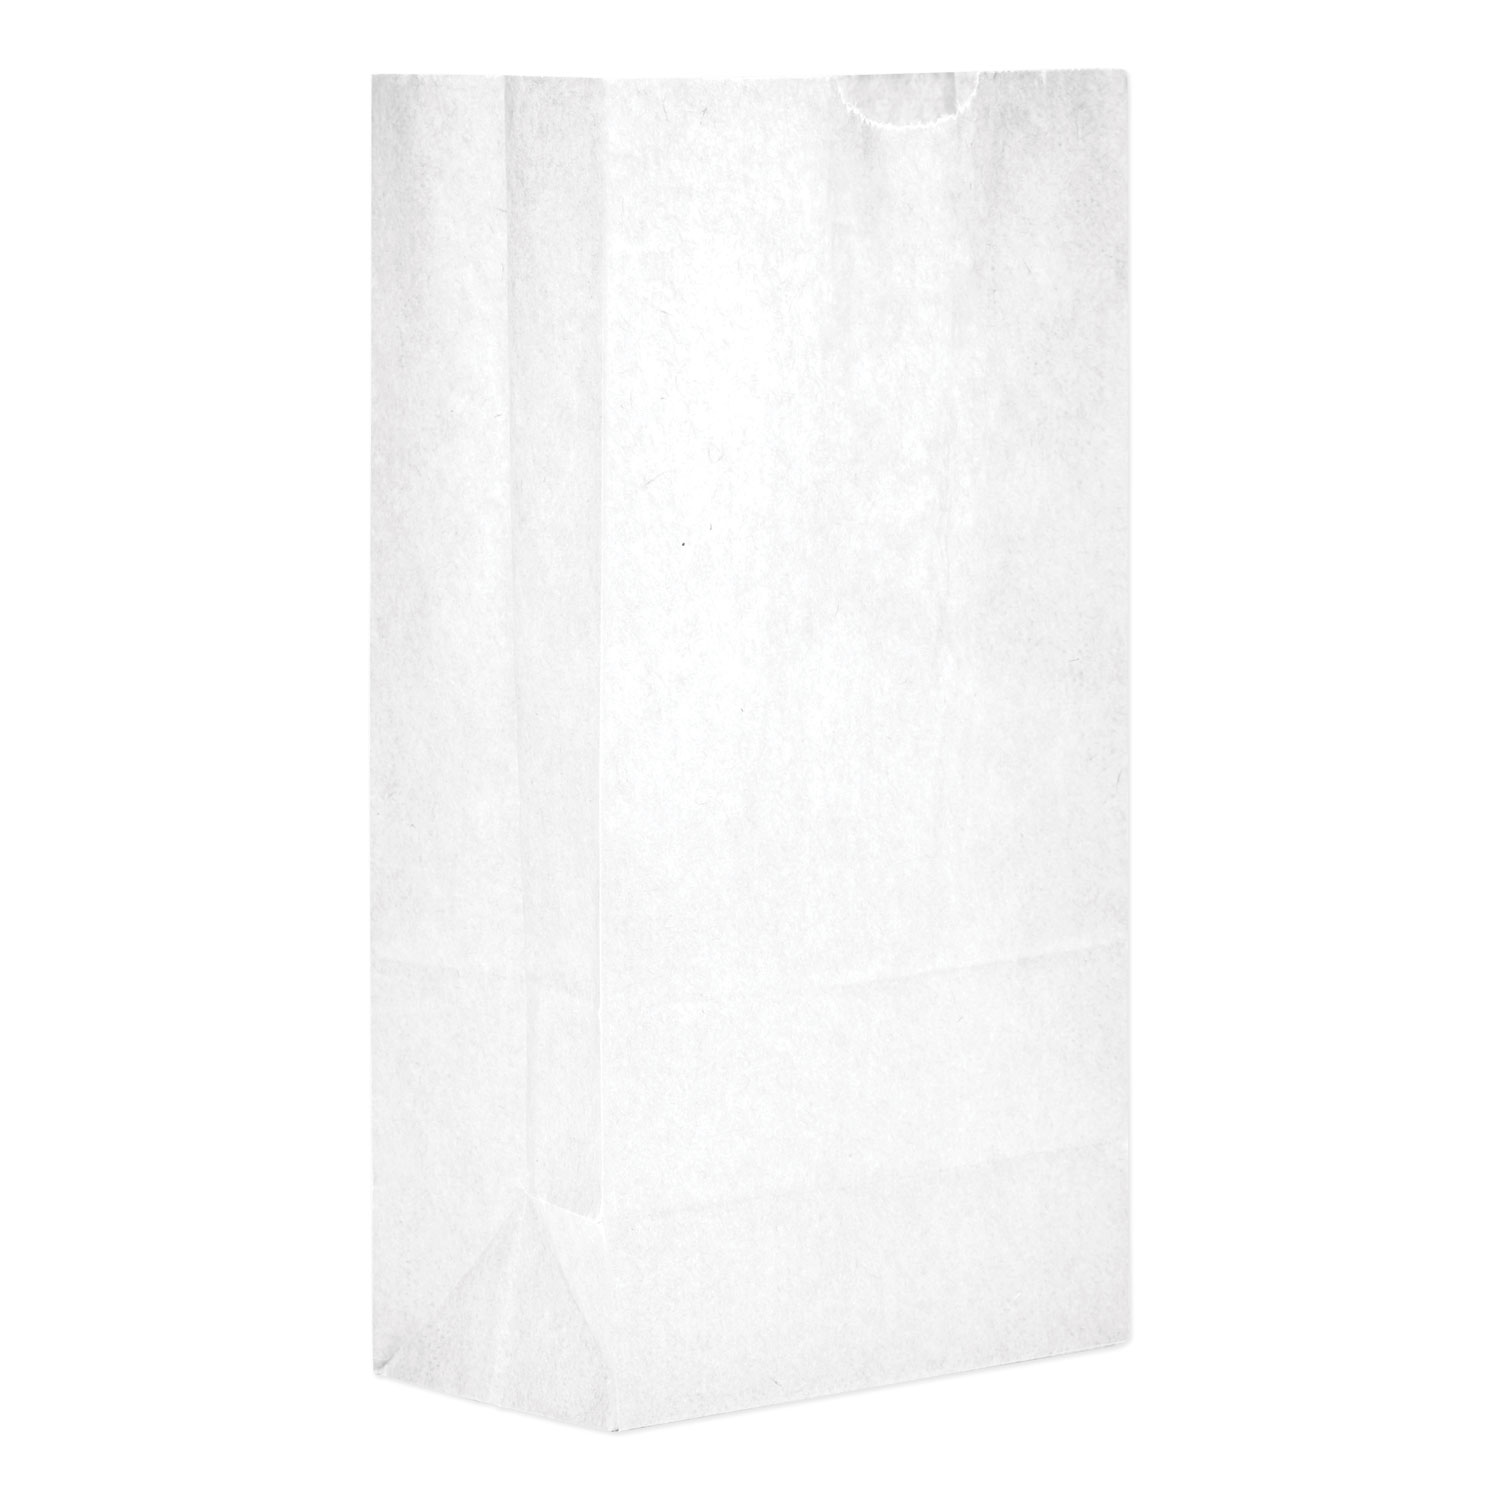  General 51045 Grocery Paper Bags, 35 lbs Capacity, #5, 5.25w x 3.44d x 10.94h, White, 500 Bags (BAGGW5500) 